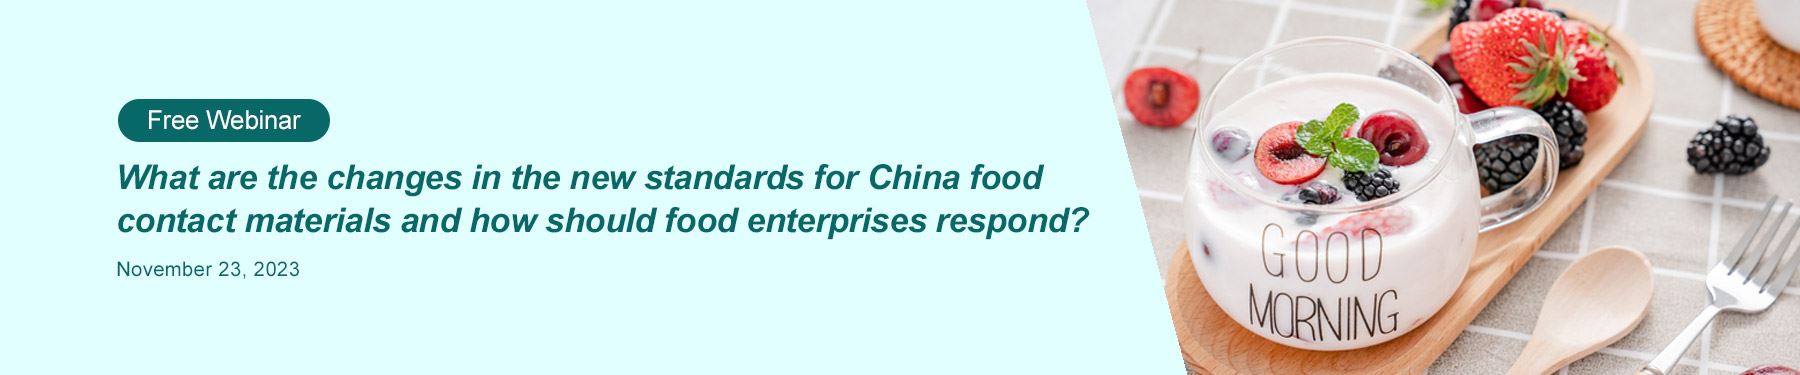 http://nanagara.com/en/food/cirs-free-webinar-what-are-the-changes-in-the-new-standards-for-china-food-contact-materials-and-how-should-food-enterprises-respond